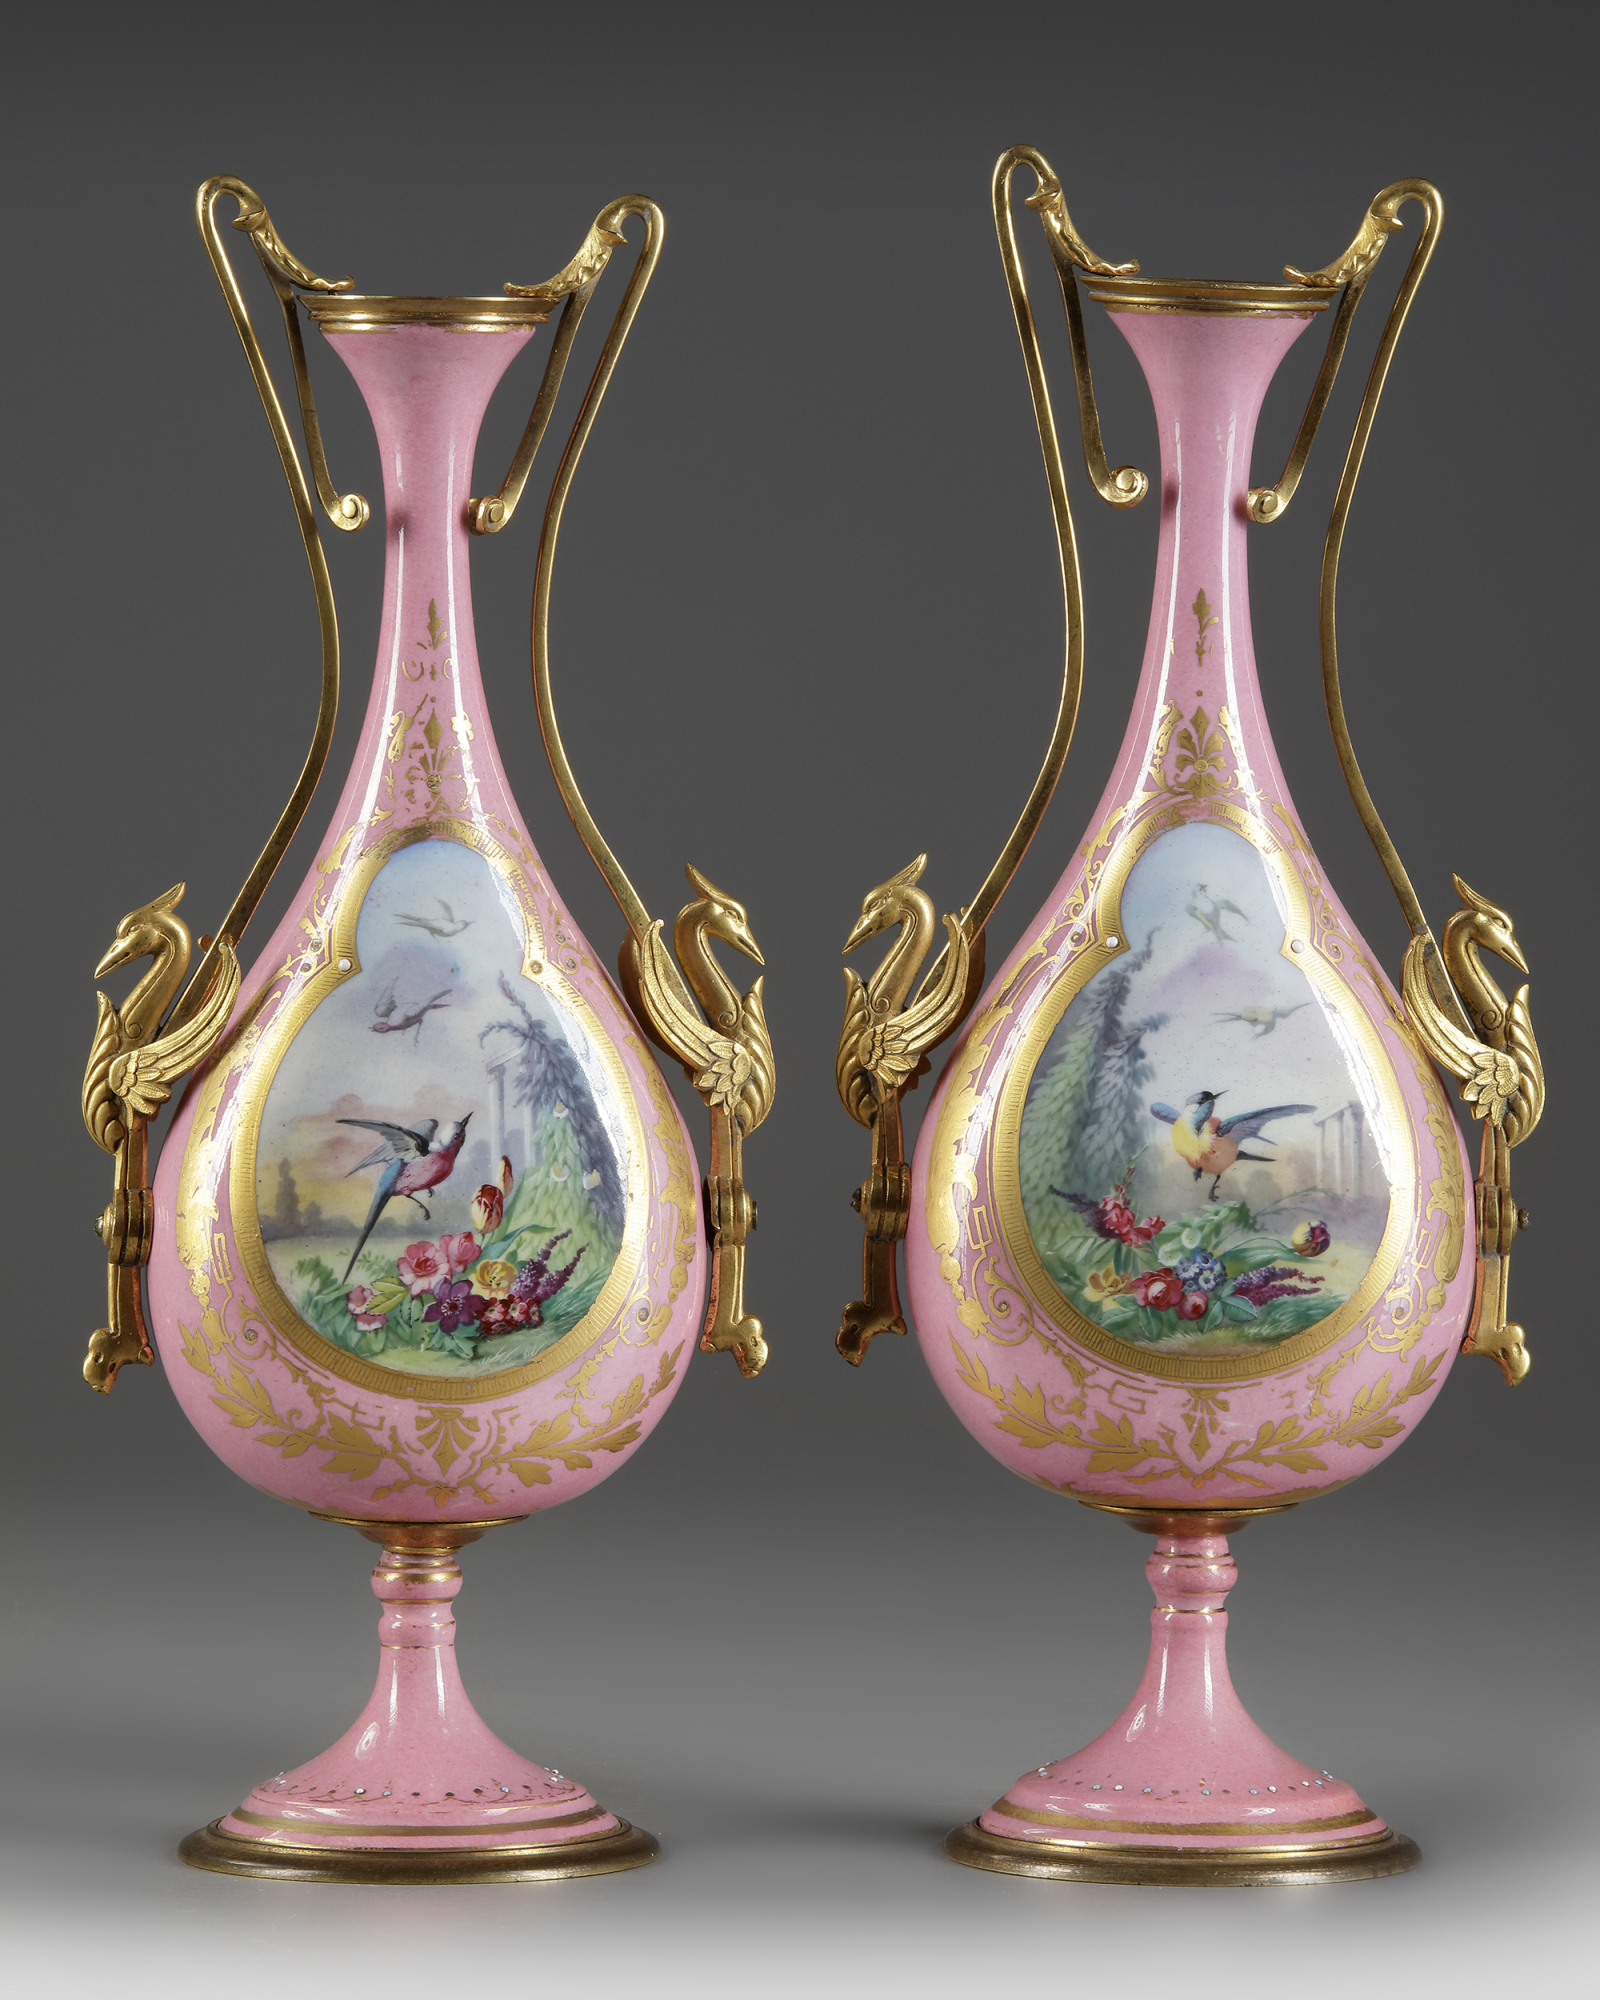 A PAIR OF FRENCH PINK SEVRES VASES, LATE 19TH CENTURY - Image 2 of 4